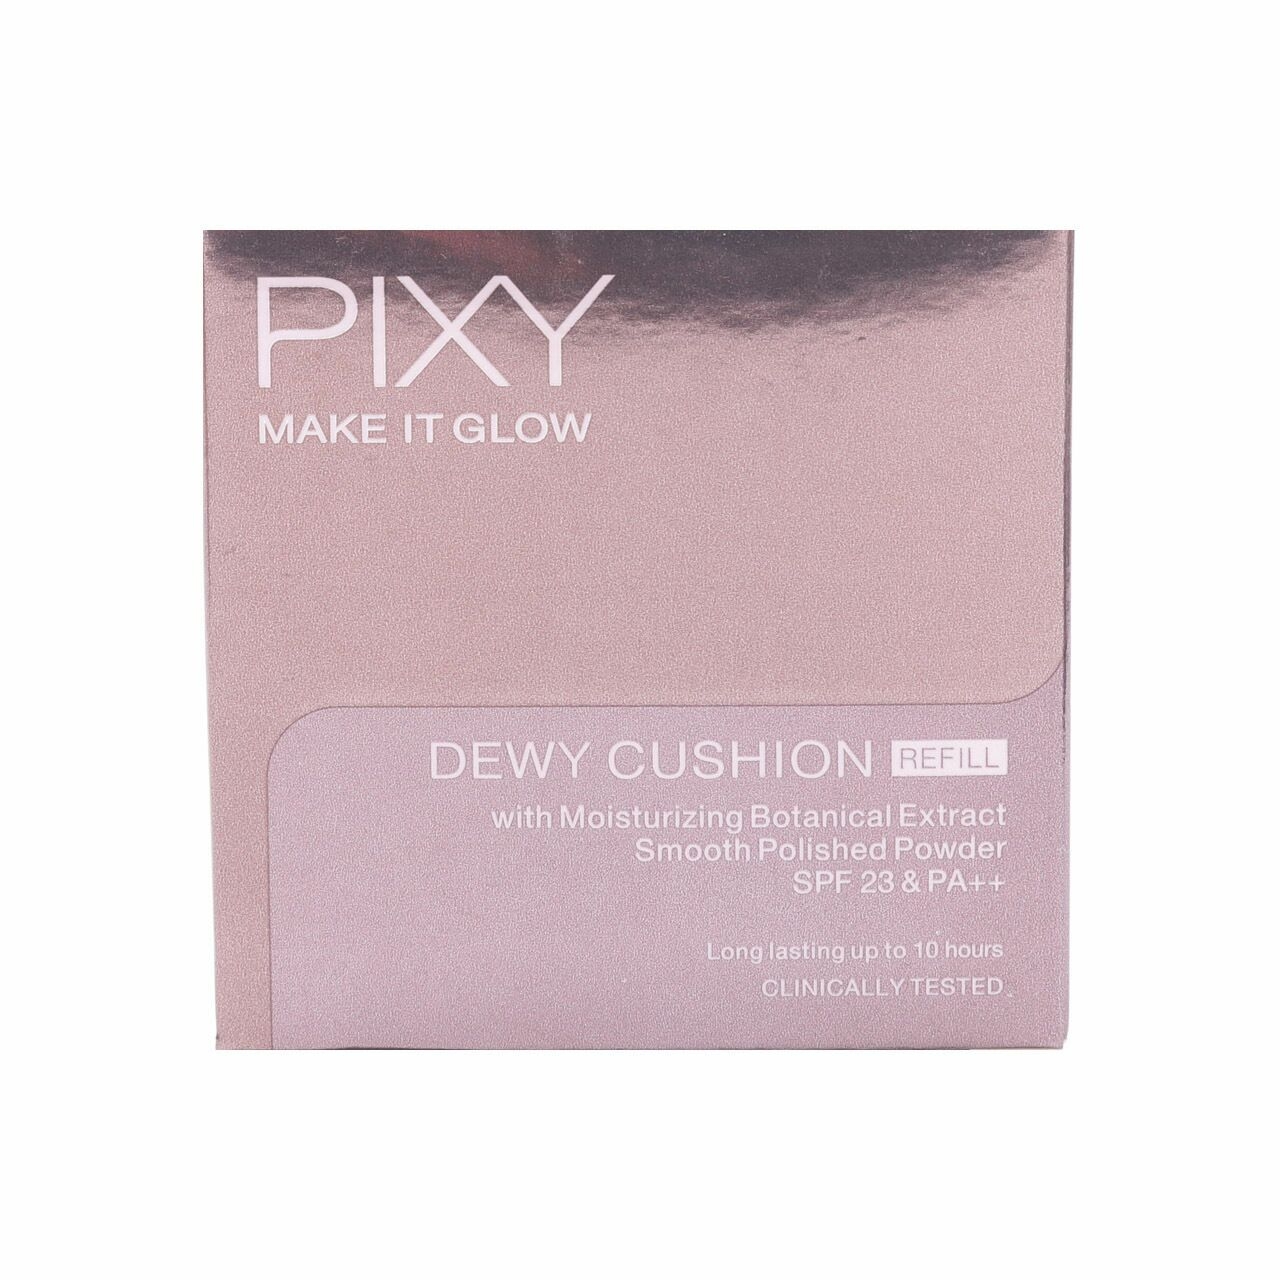 Pixy Dewy Cushion Refill SPF 23 PA++ 201 Neutral Beige Faces